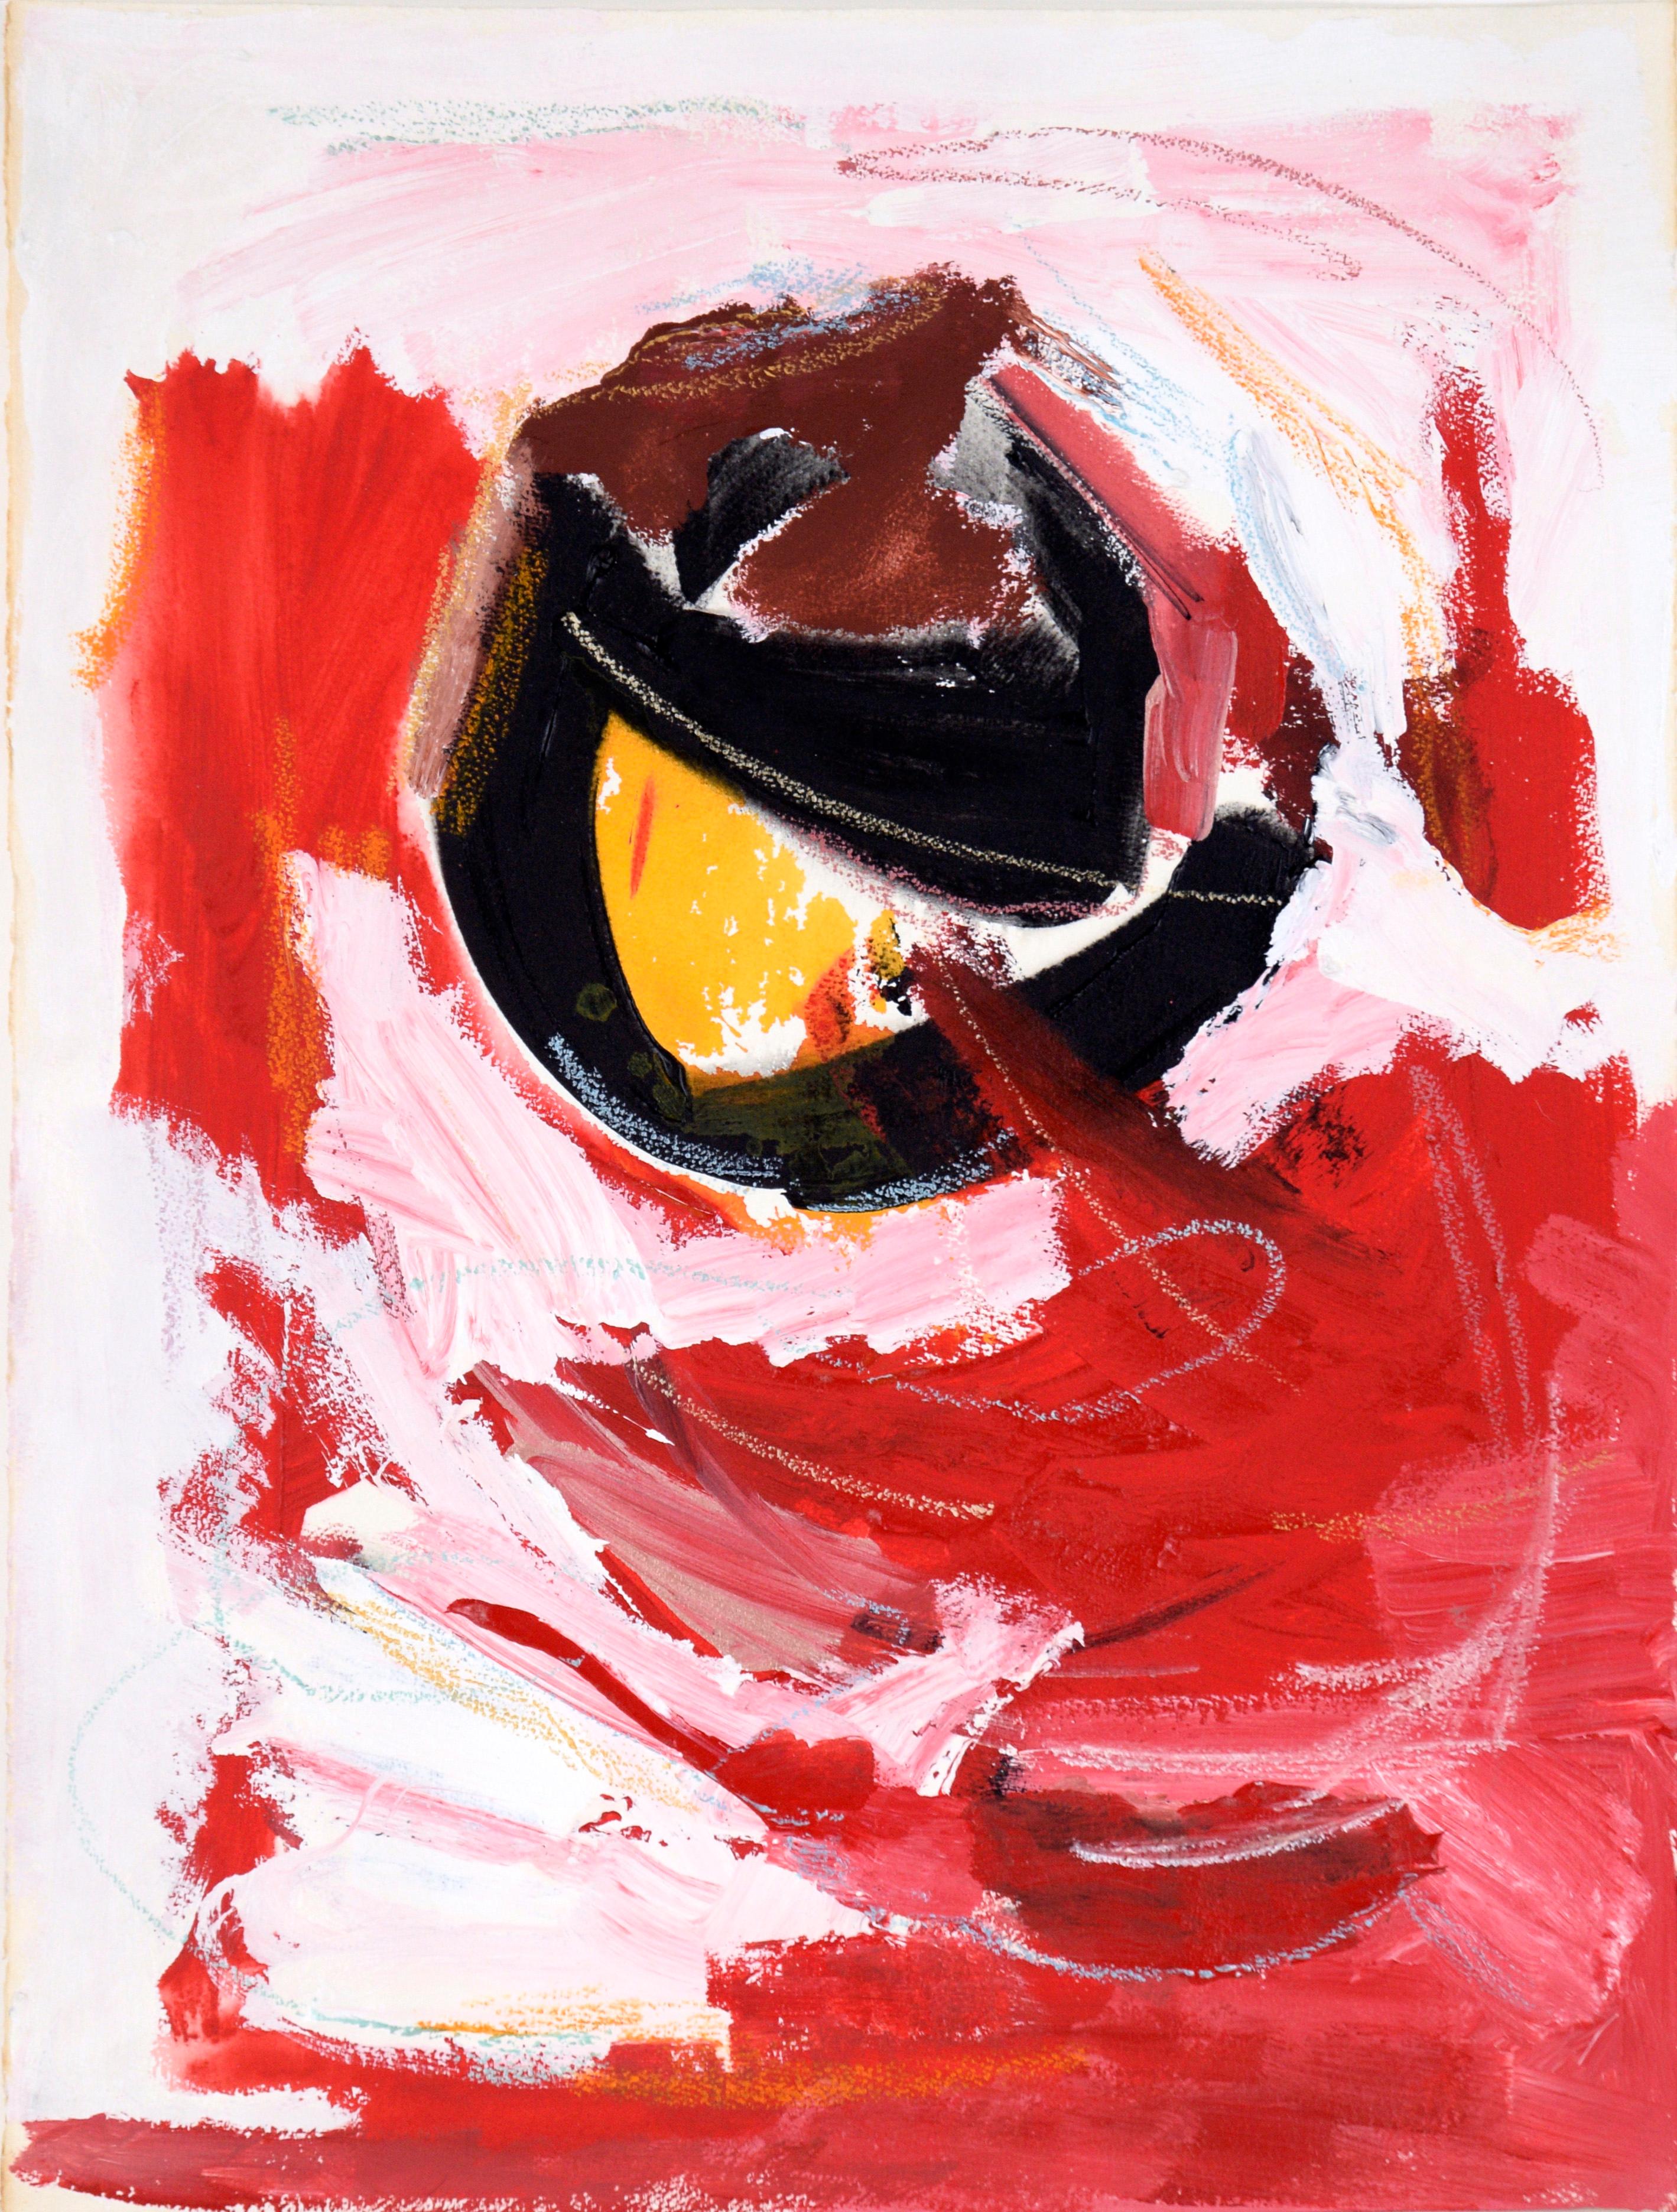 Ricardo de Silva Abstract Painting - Black Sun in the Red and White Sky - Acrylic on Paper